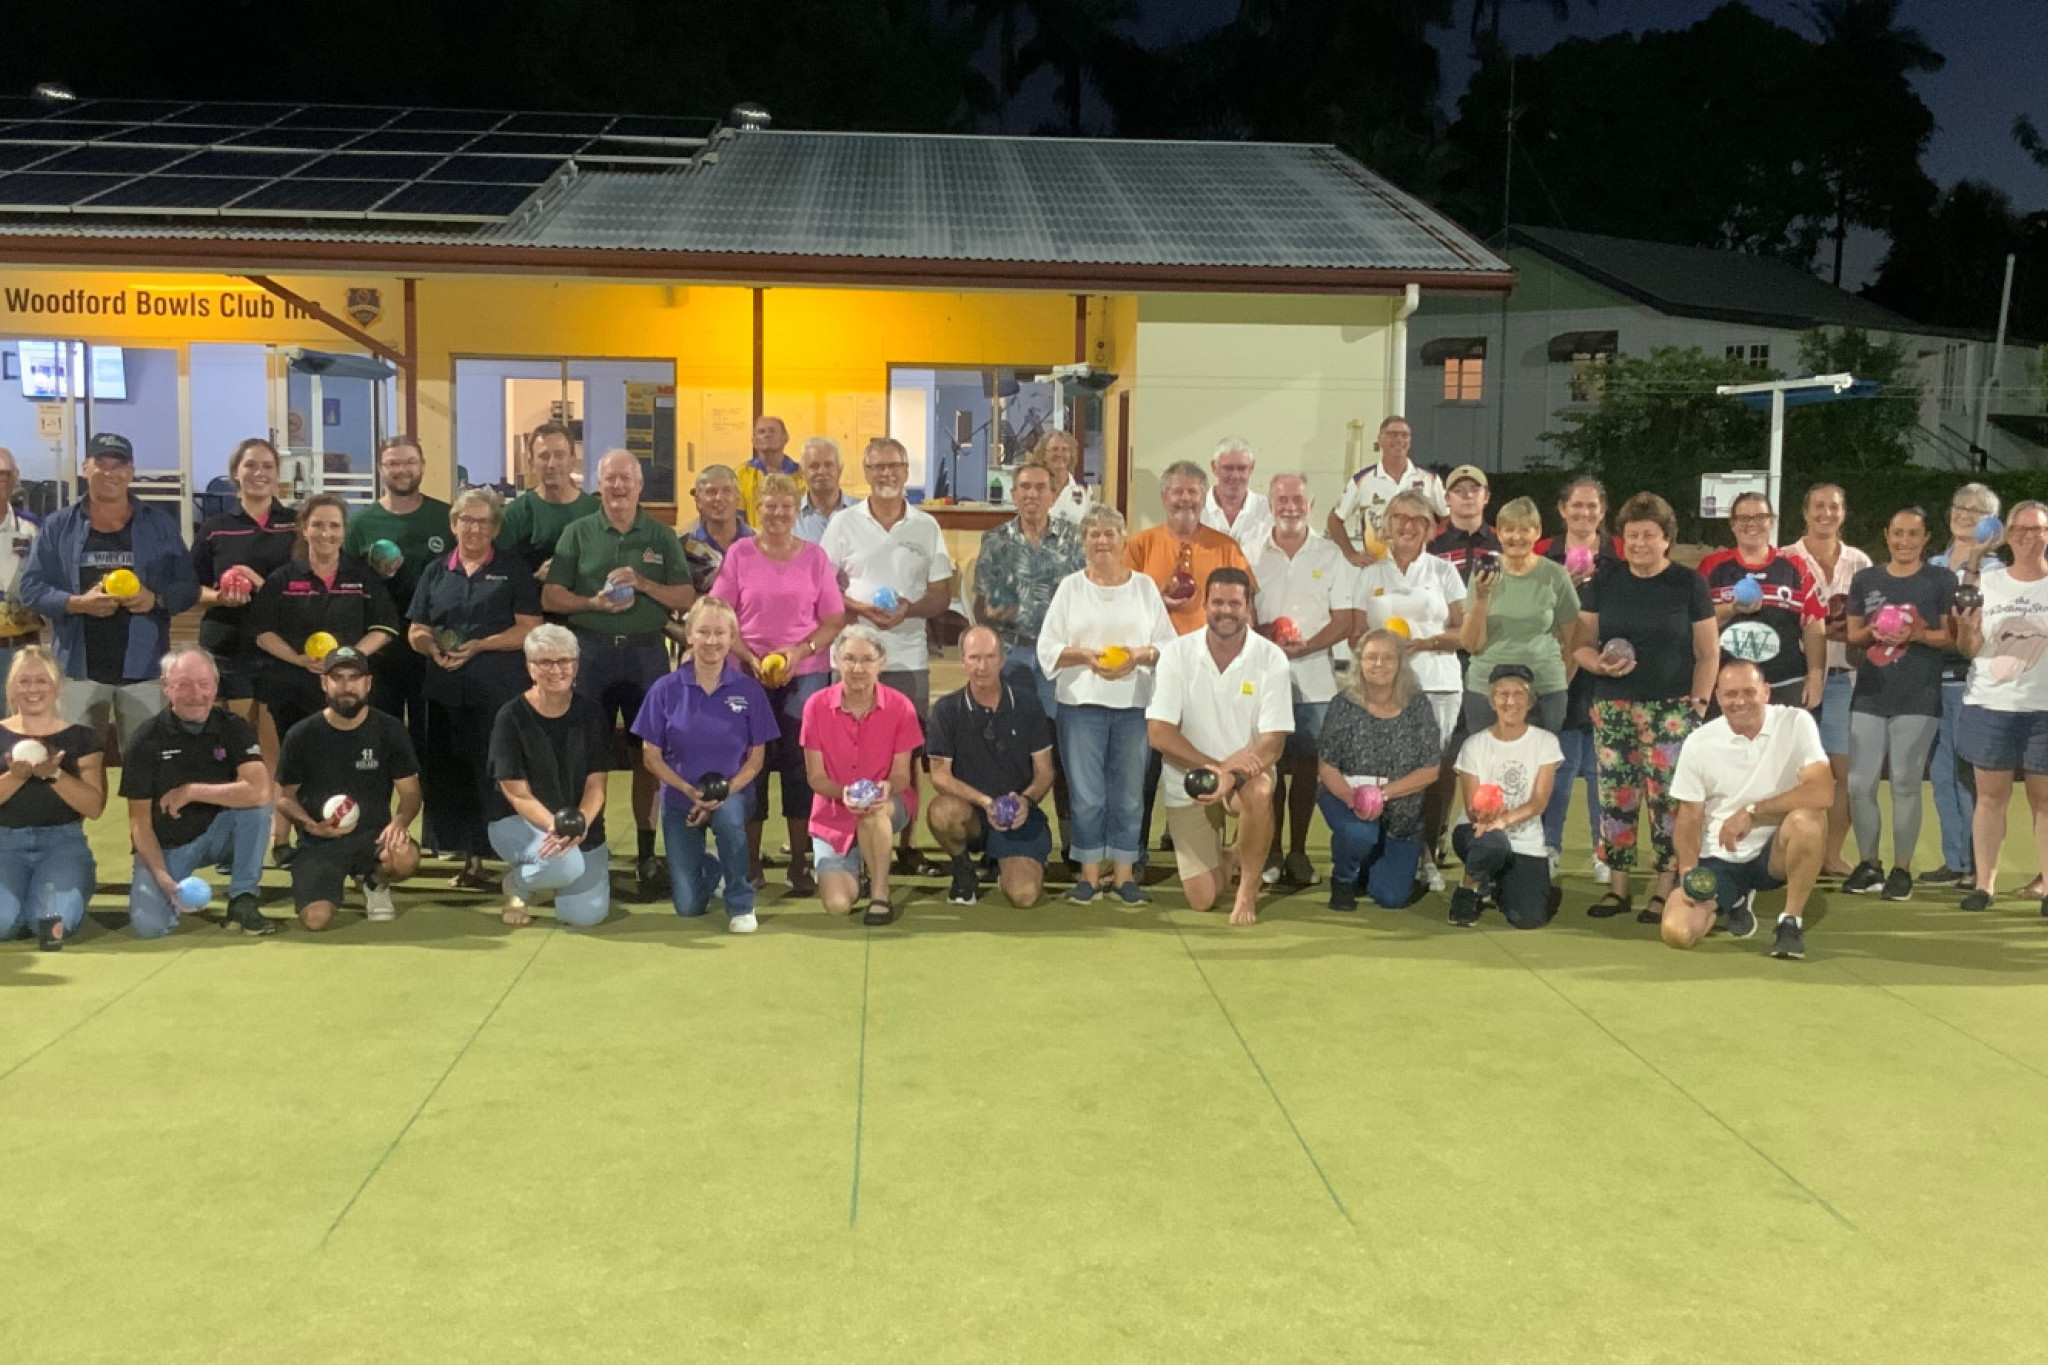 Many businesses and community groups have taken to Tuesday night bowls in Woodford.